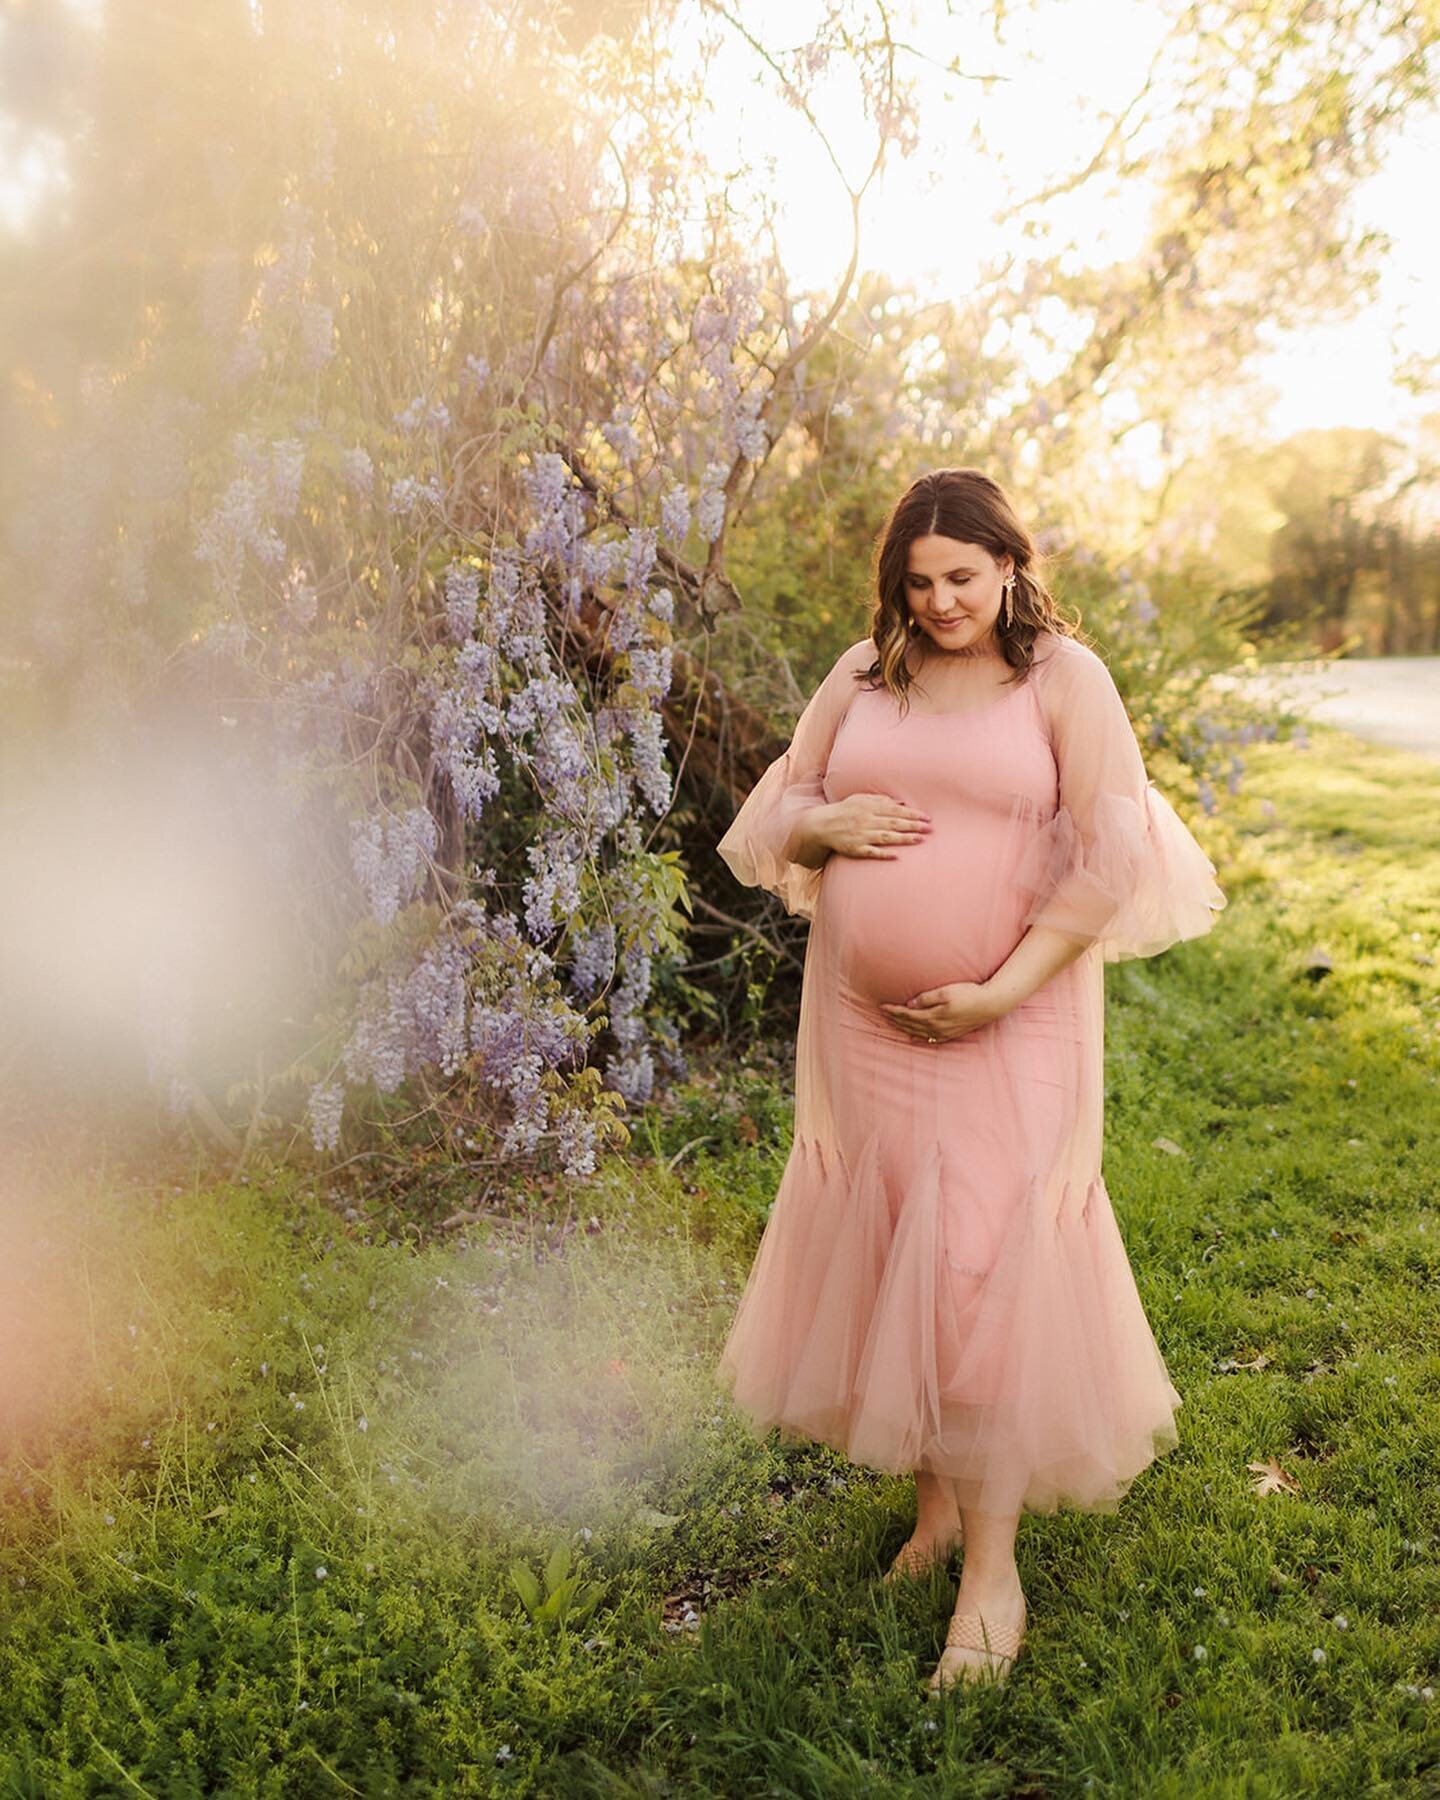 Can I get a 👏🏼👏🏼👏🏼 for how gorgeous Kennedy is?!? ✨ 

We are just weeks away from Sam and K welcoming their daughter Gemma into the world. I know Kennedy has always wanted to be a mom and I cannot wait to see her in her element once baby girl i